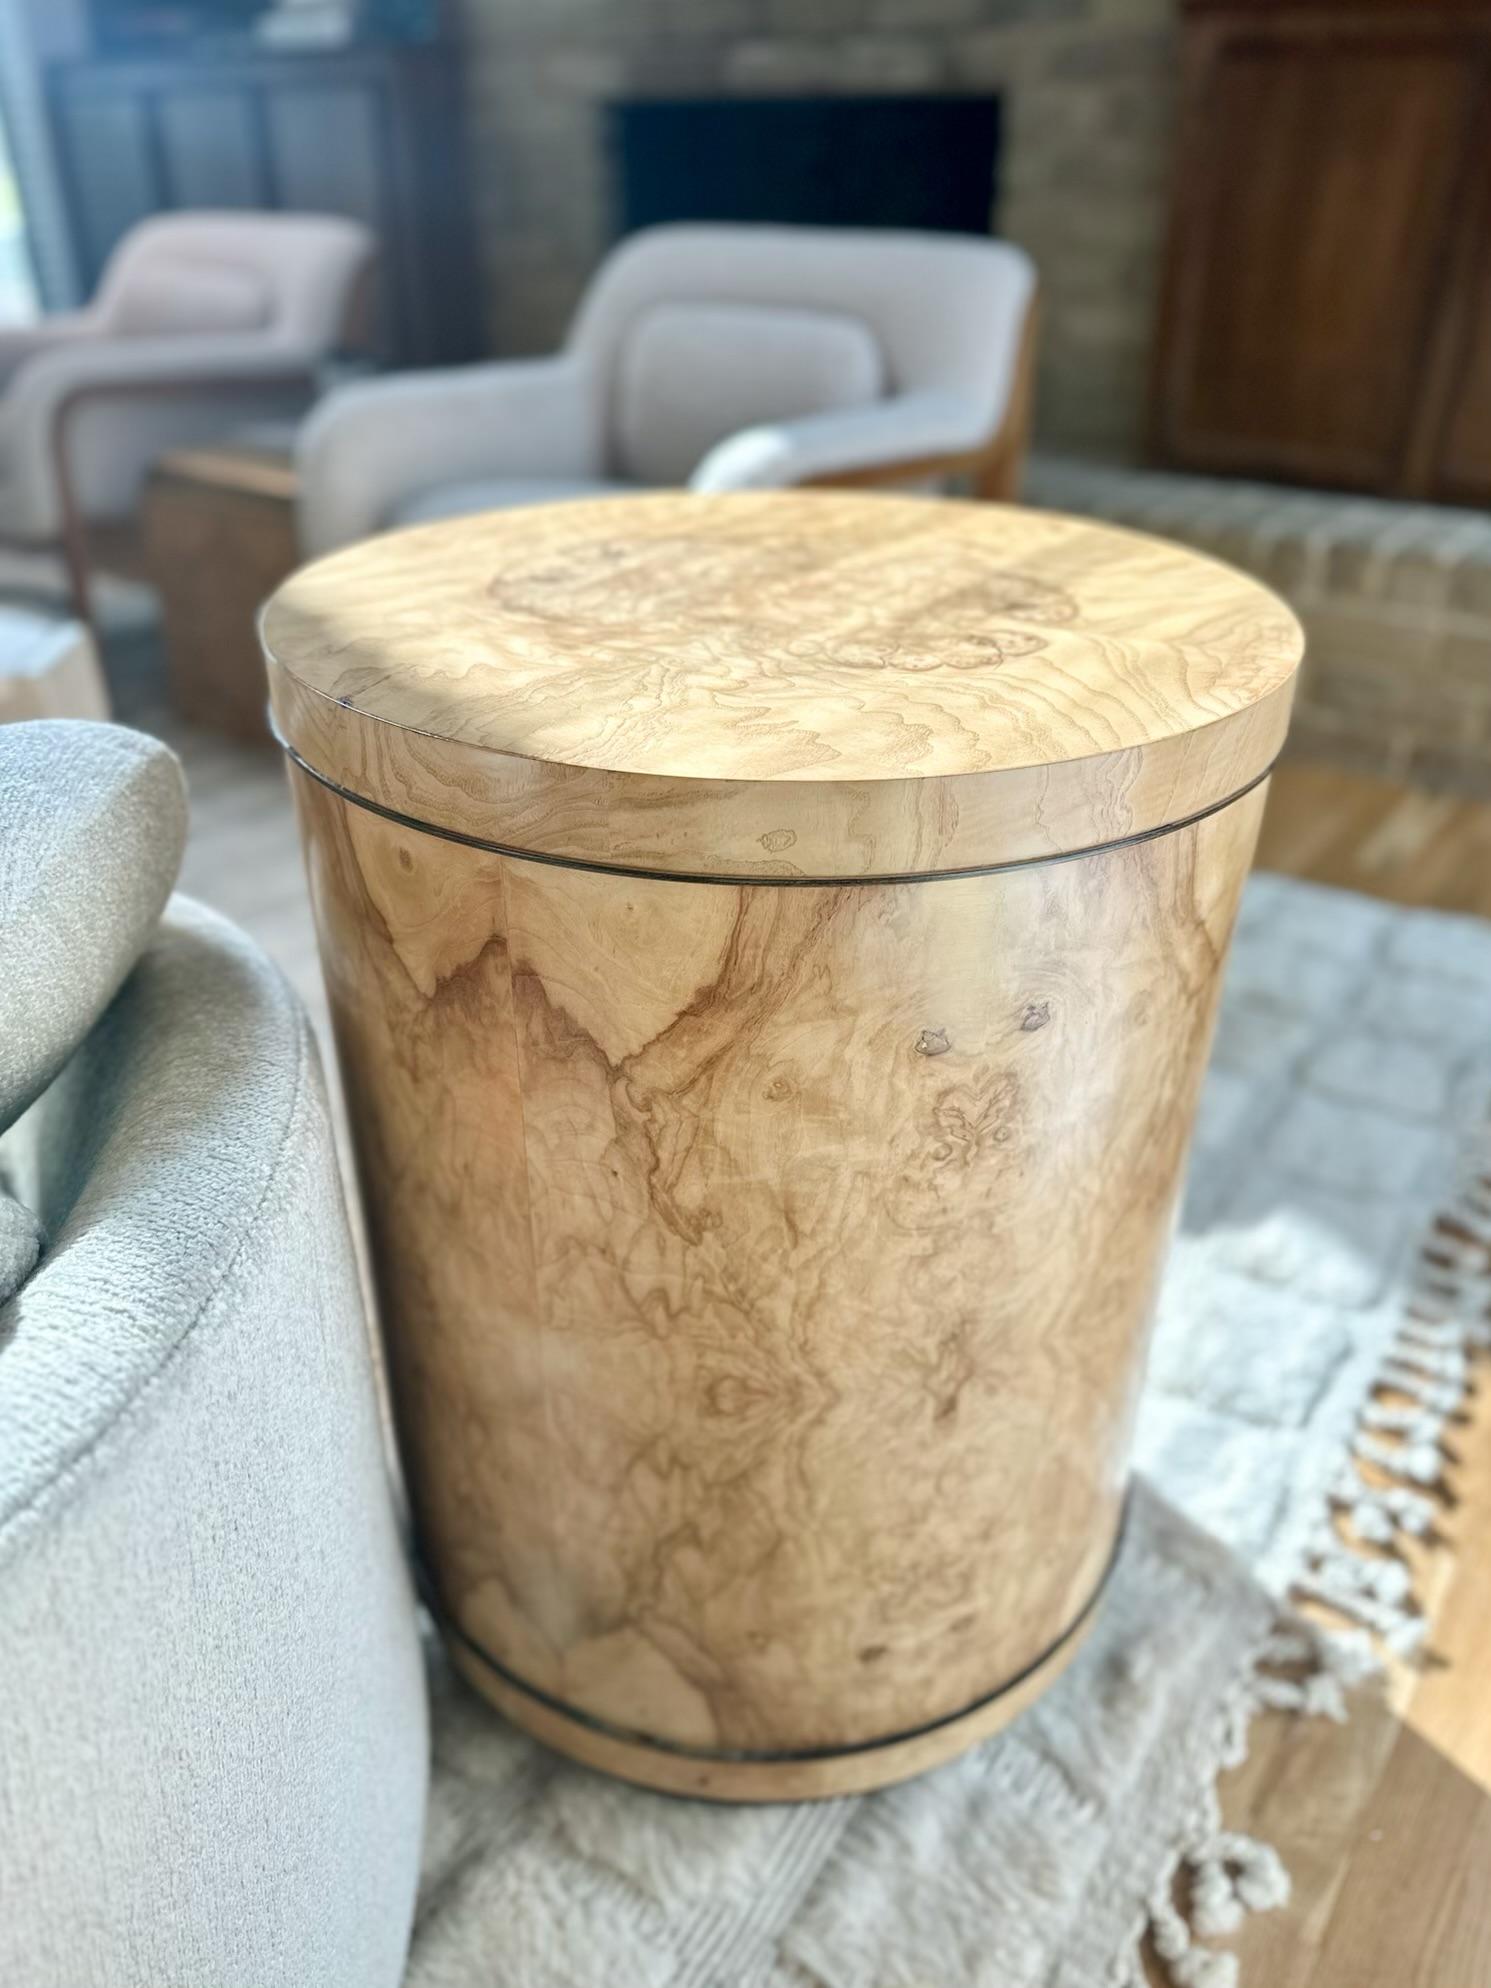 Fantastic burlwood drum side table by Henredon, c.1980s. For decades, the Henredon name has been synonymous with fine furniture, and their Scene Two collection exemplifies this best. With solid ash casing, olivewood burl veneer, and ebonized plinth